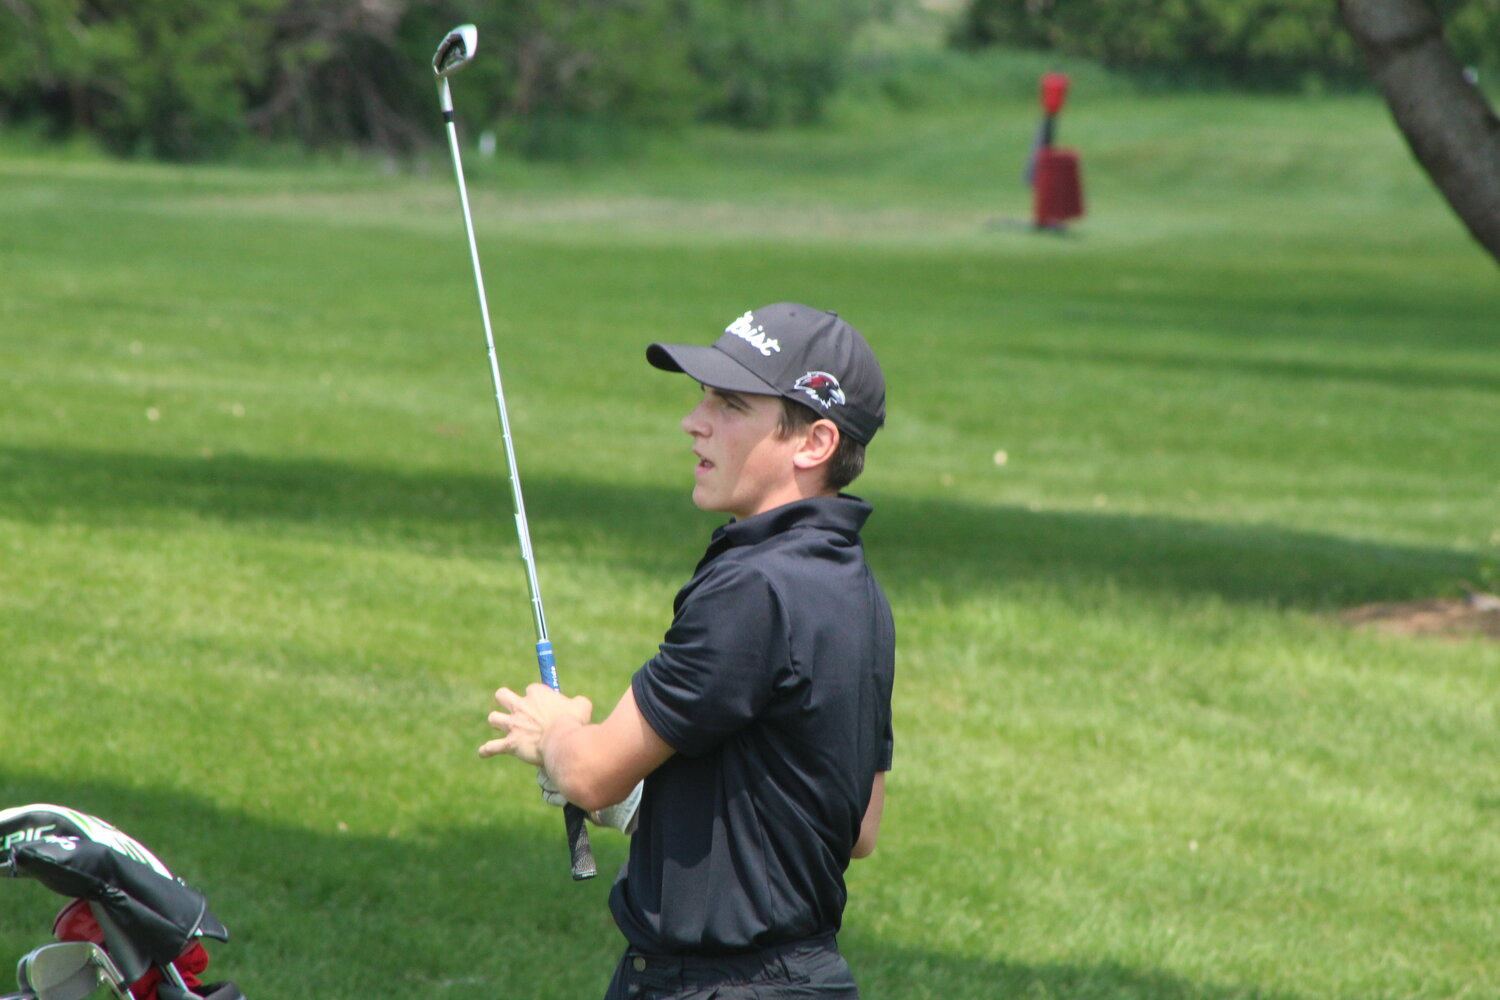 Rowan Miller, a Hillcrest senior, finished the two-day state tournament tied for seventh place individually.